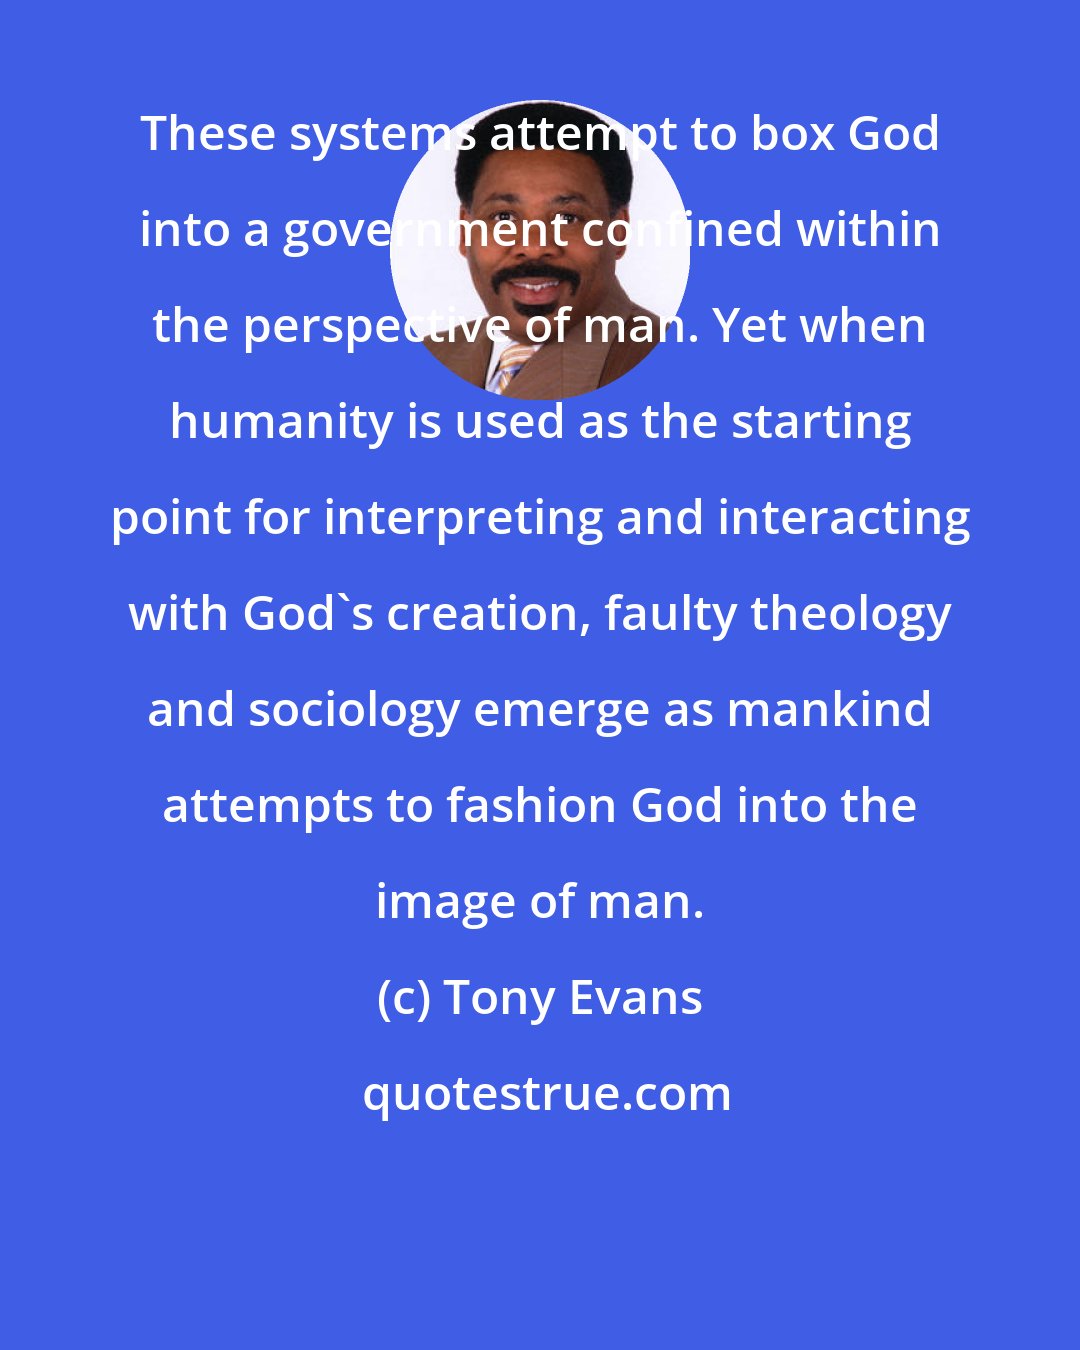 Tony Evans: These systems attempt to box God into a government confined within the perspective of man. Yet when humanity is used as the starting point for interpreting and interacting with God's creation, faulty theology and sociology emerge as mankind attempts to fashion God into the image of man.